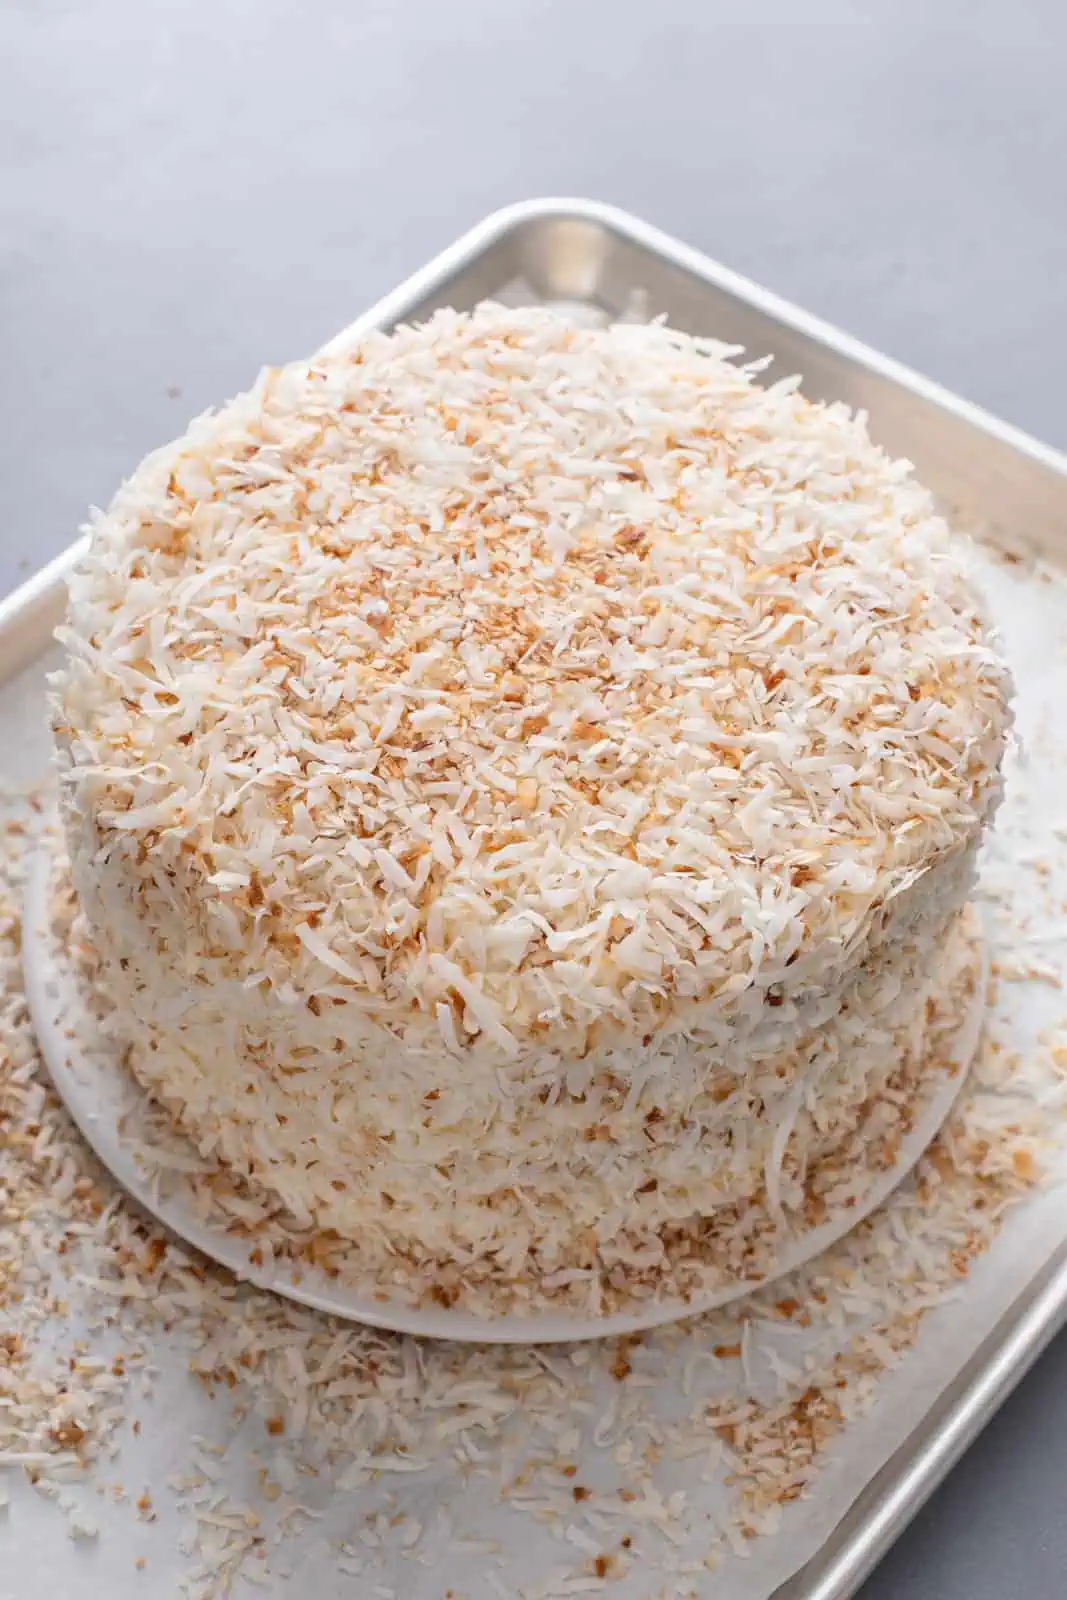 Toasted coconut covering the outside of a coconut cake.